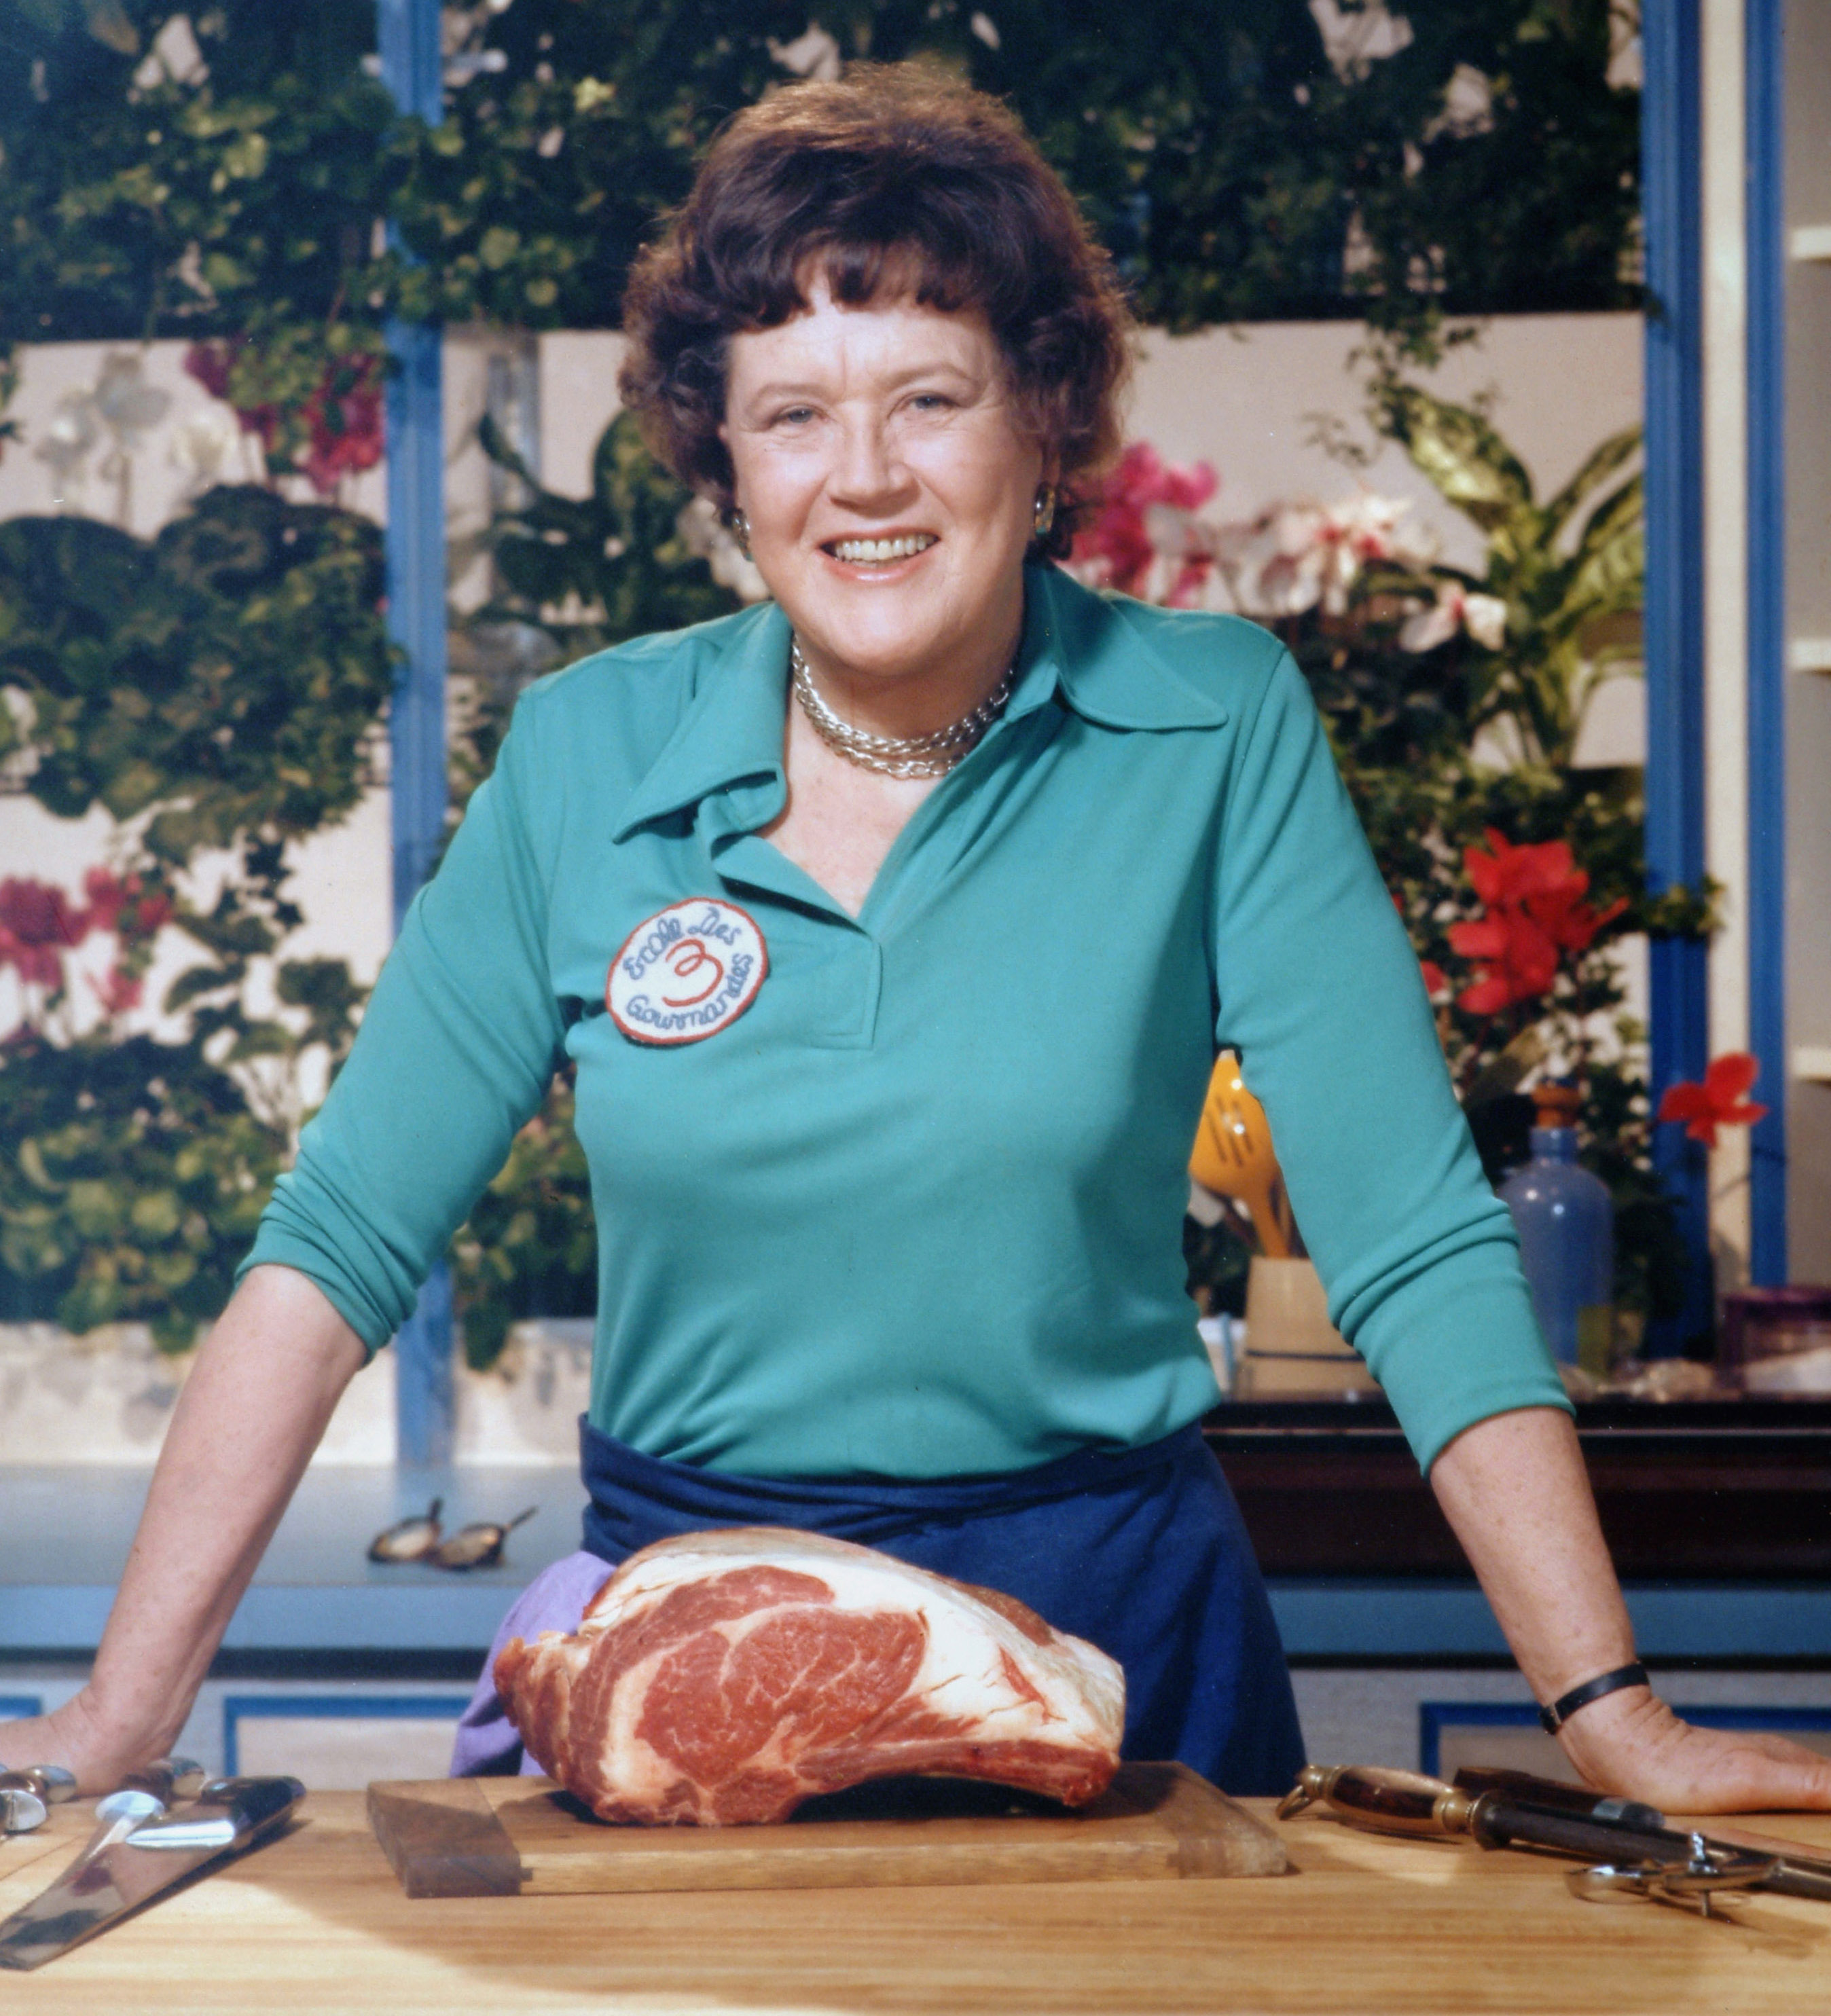 Julia Child Net Worth In 2022 - A Celebrity In The Culinary World